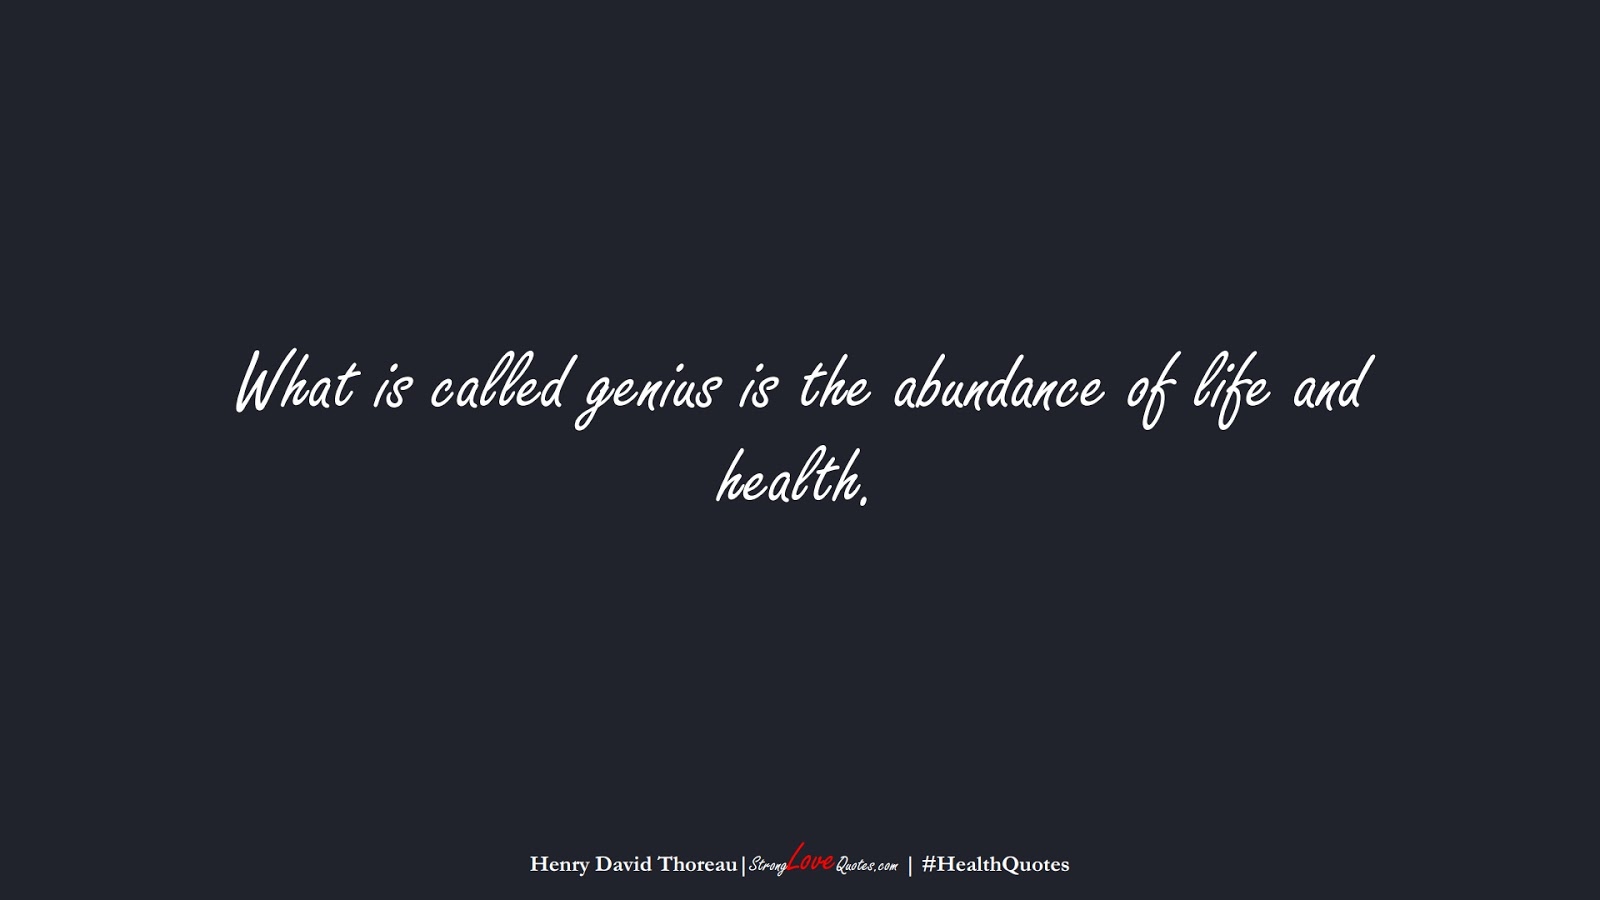 What is called genius is the abundance of life and health. (Henry David Thoreau);  #HealthQuotes